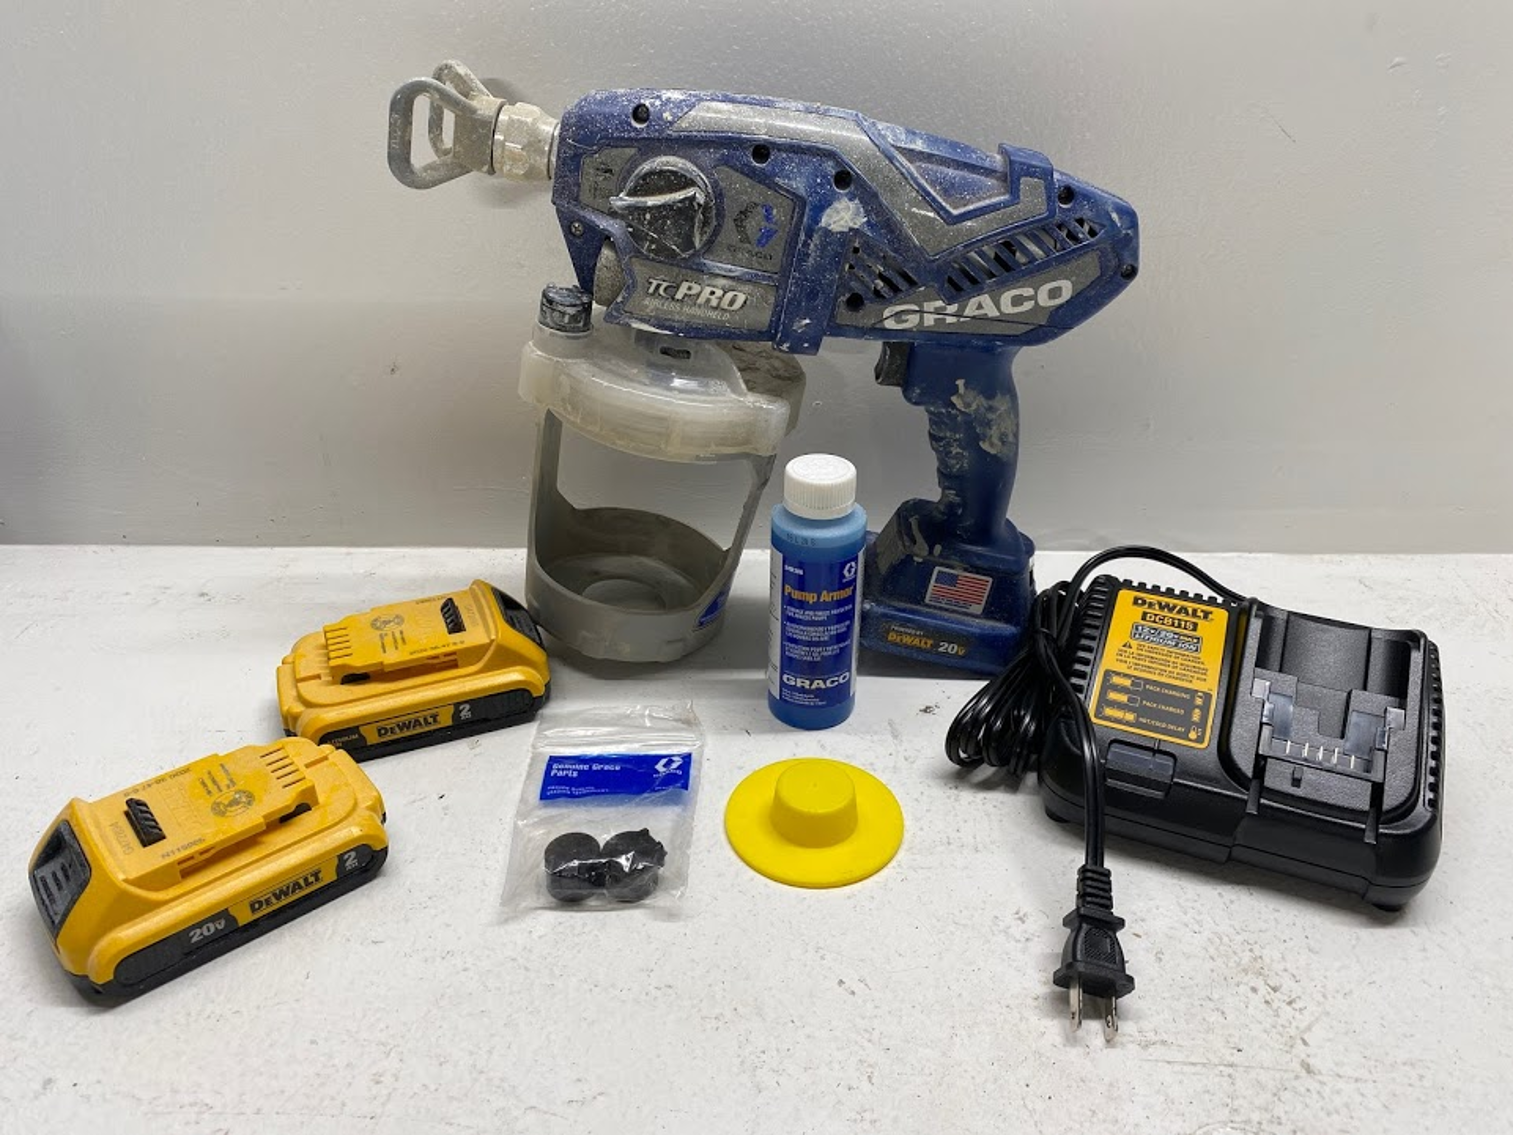 Liquidation Merchandise Auction: Home Improvement, Tools, Outdoor Equipment and More